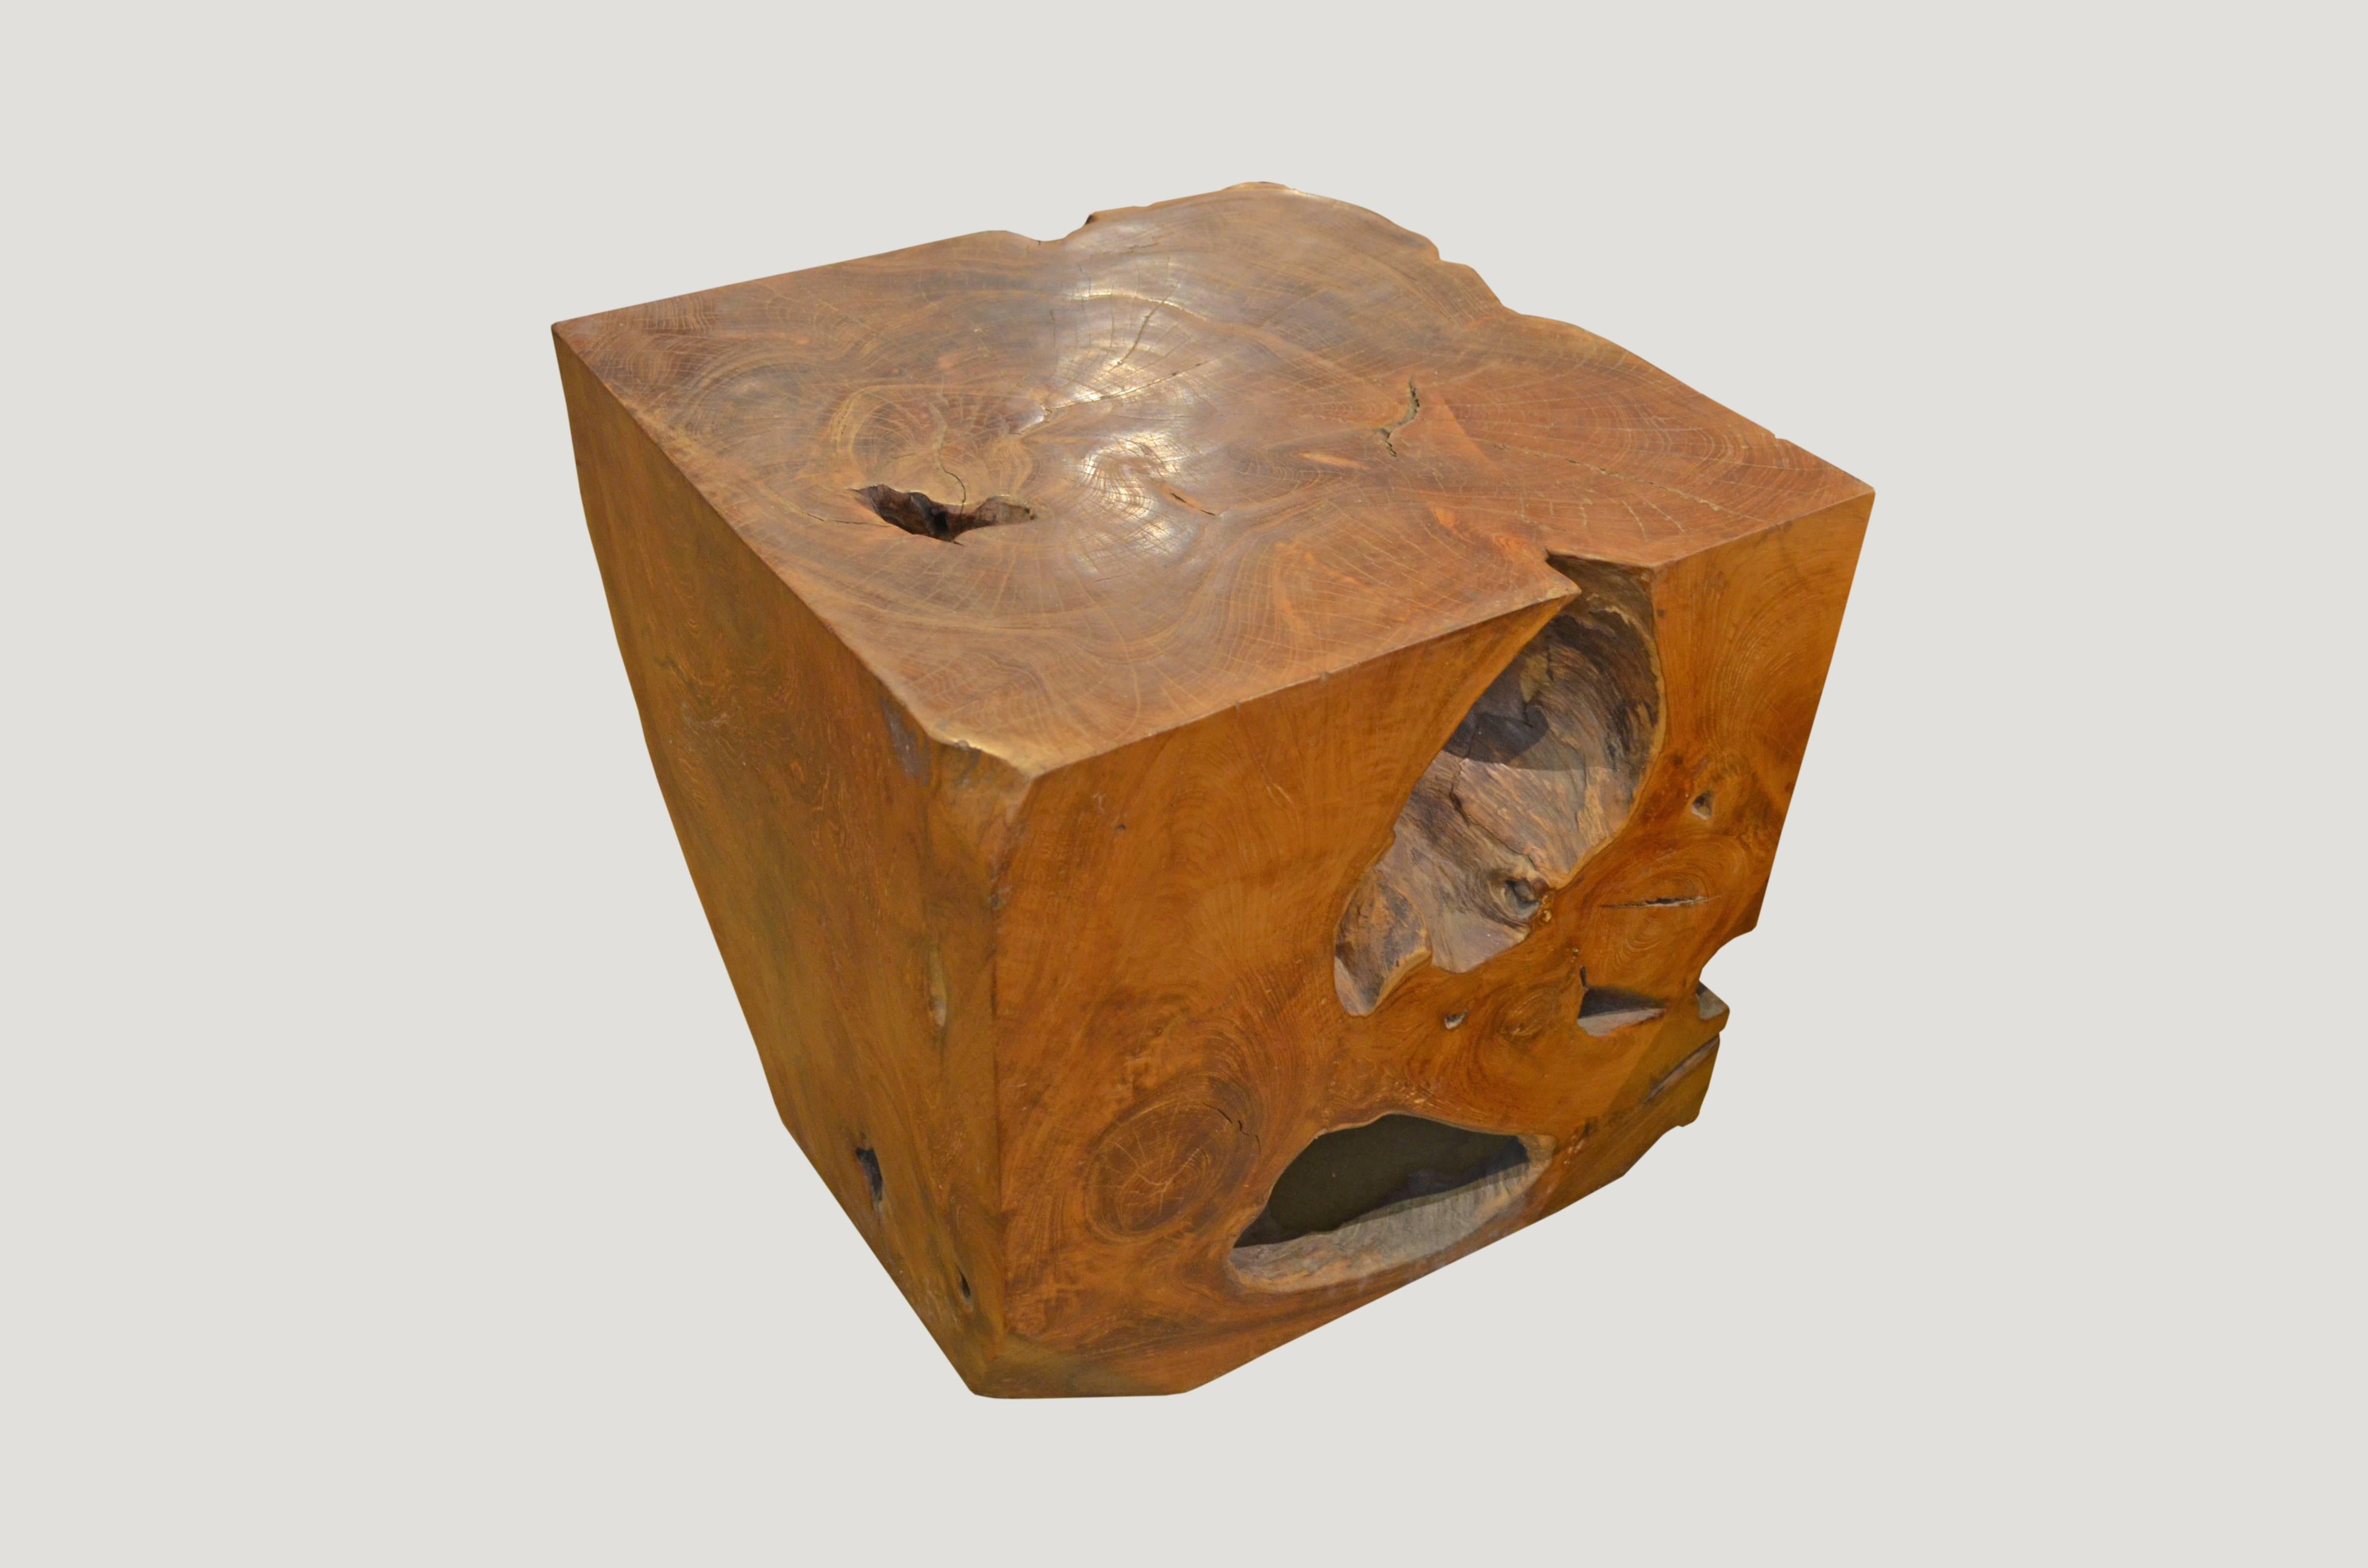 Single root reclaimed teak wood side table or pedestal. Sanded and polished with a natural oil finish.

Andrianna Shamaris, Inc. The Leader In Modern Organic Design™